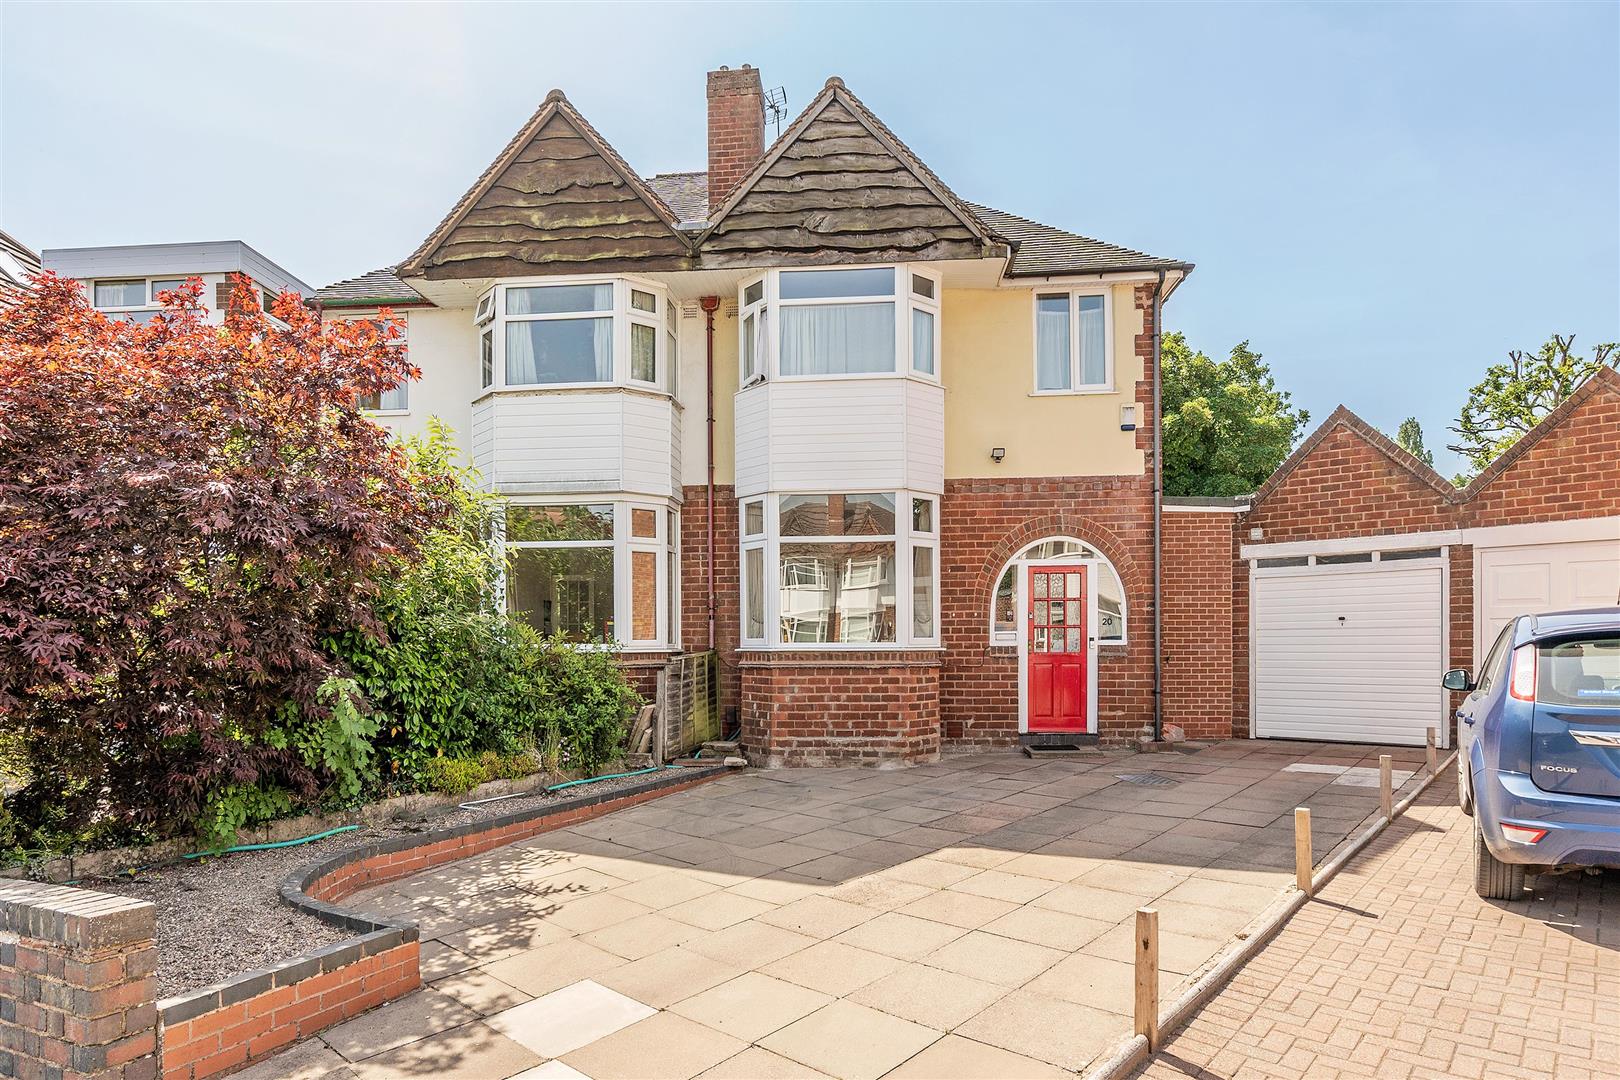 3 bed  for sale in Brampton Avenue, Hall Green, B28 